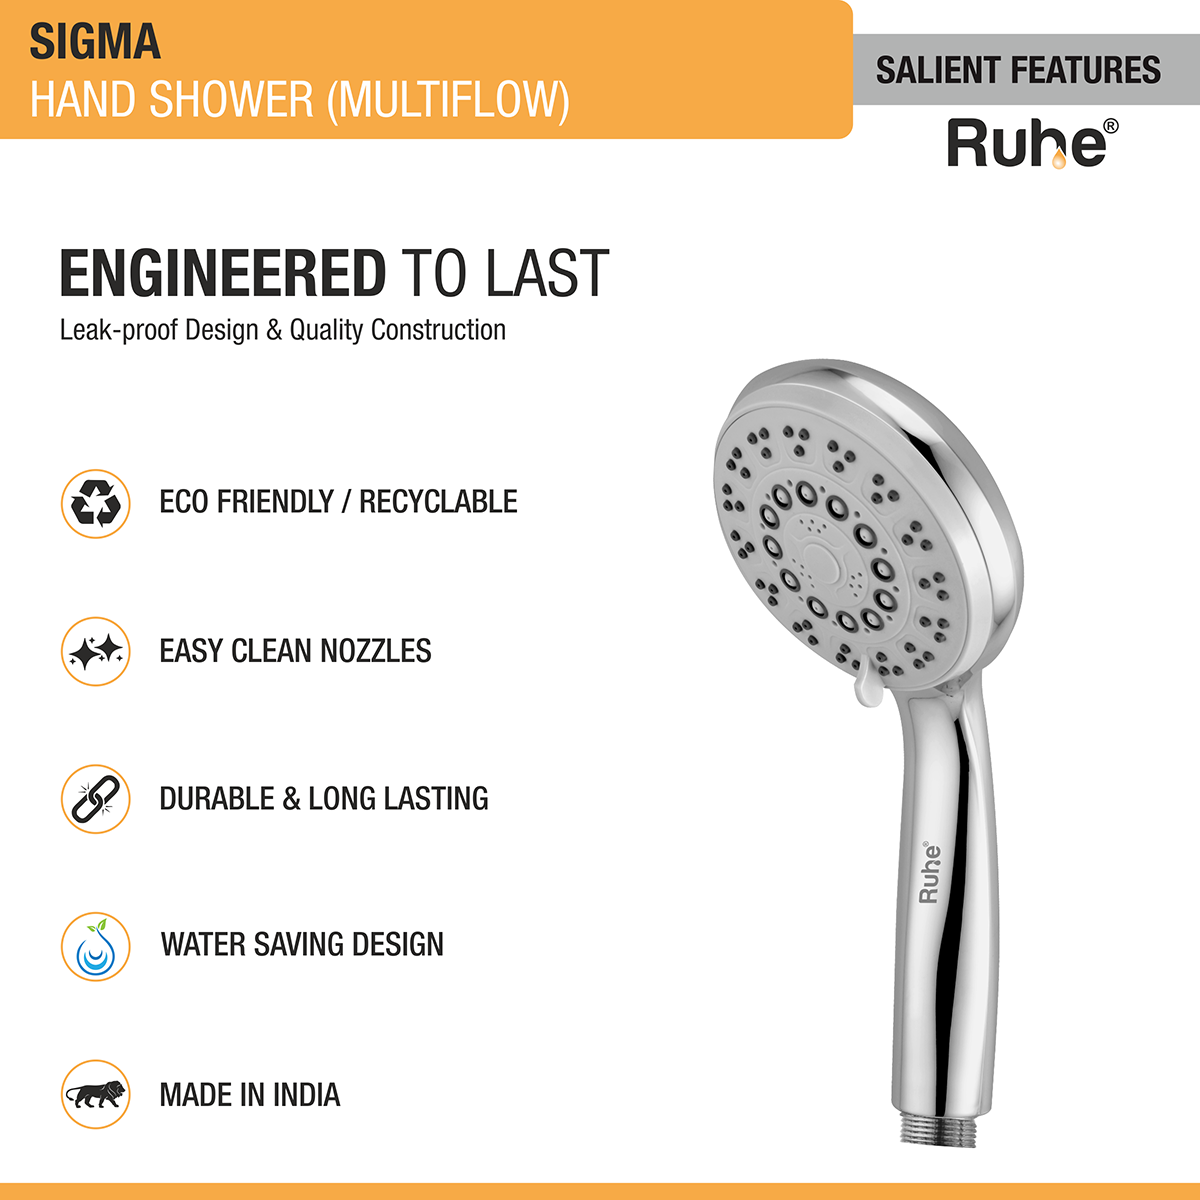 Sigma ABS Multi-Flow Hand Shower (Only Showerhead) features